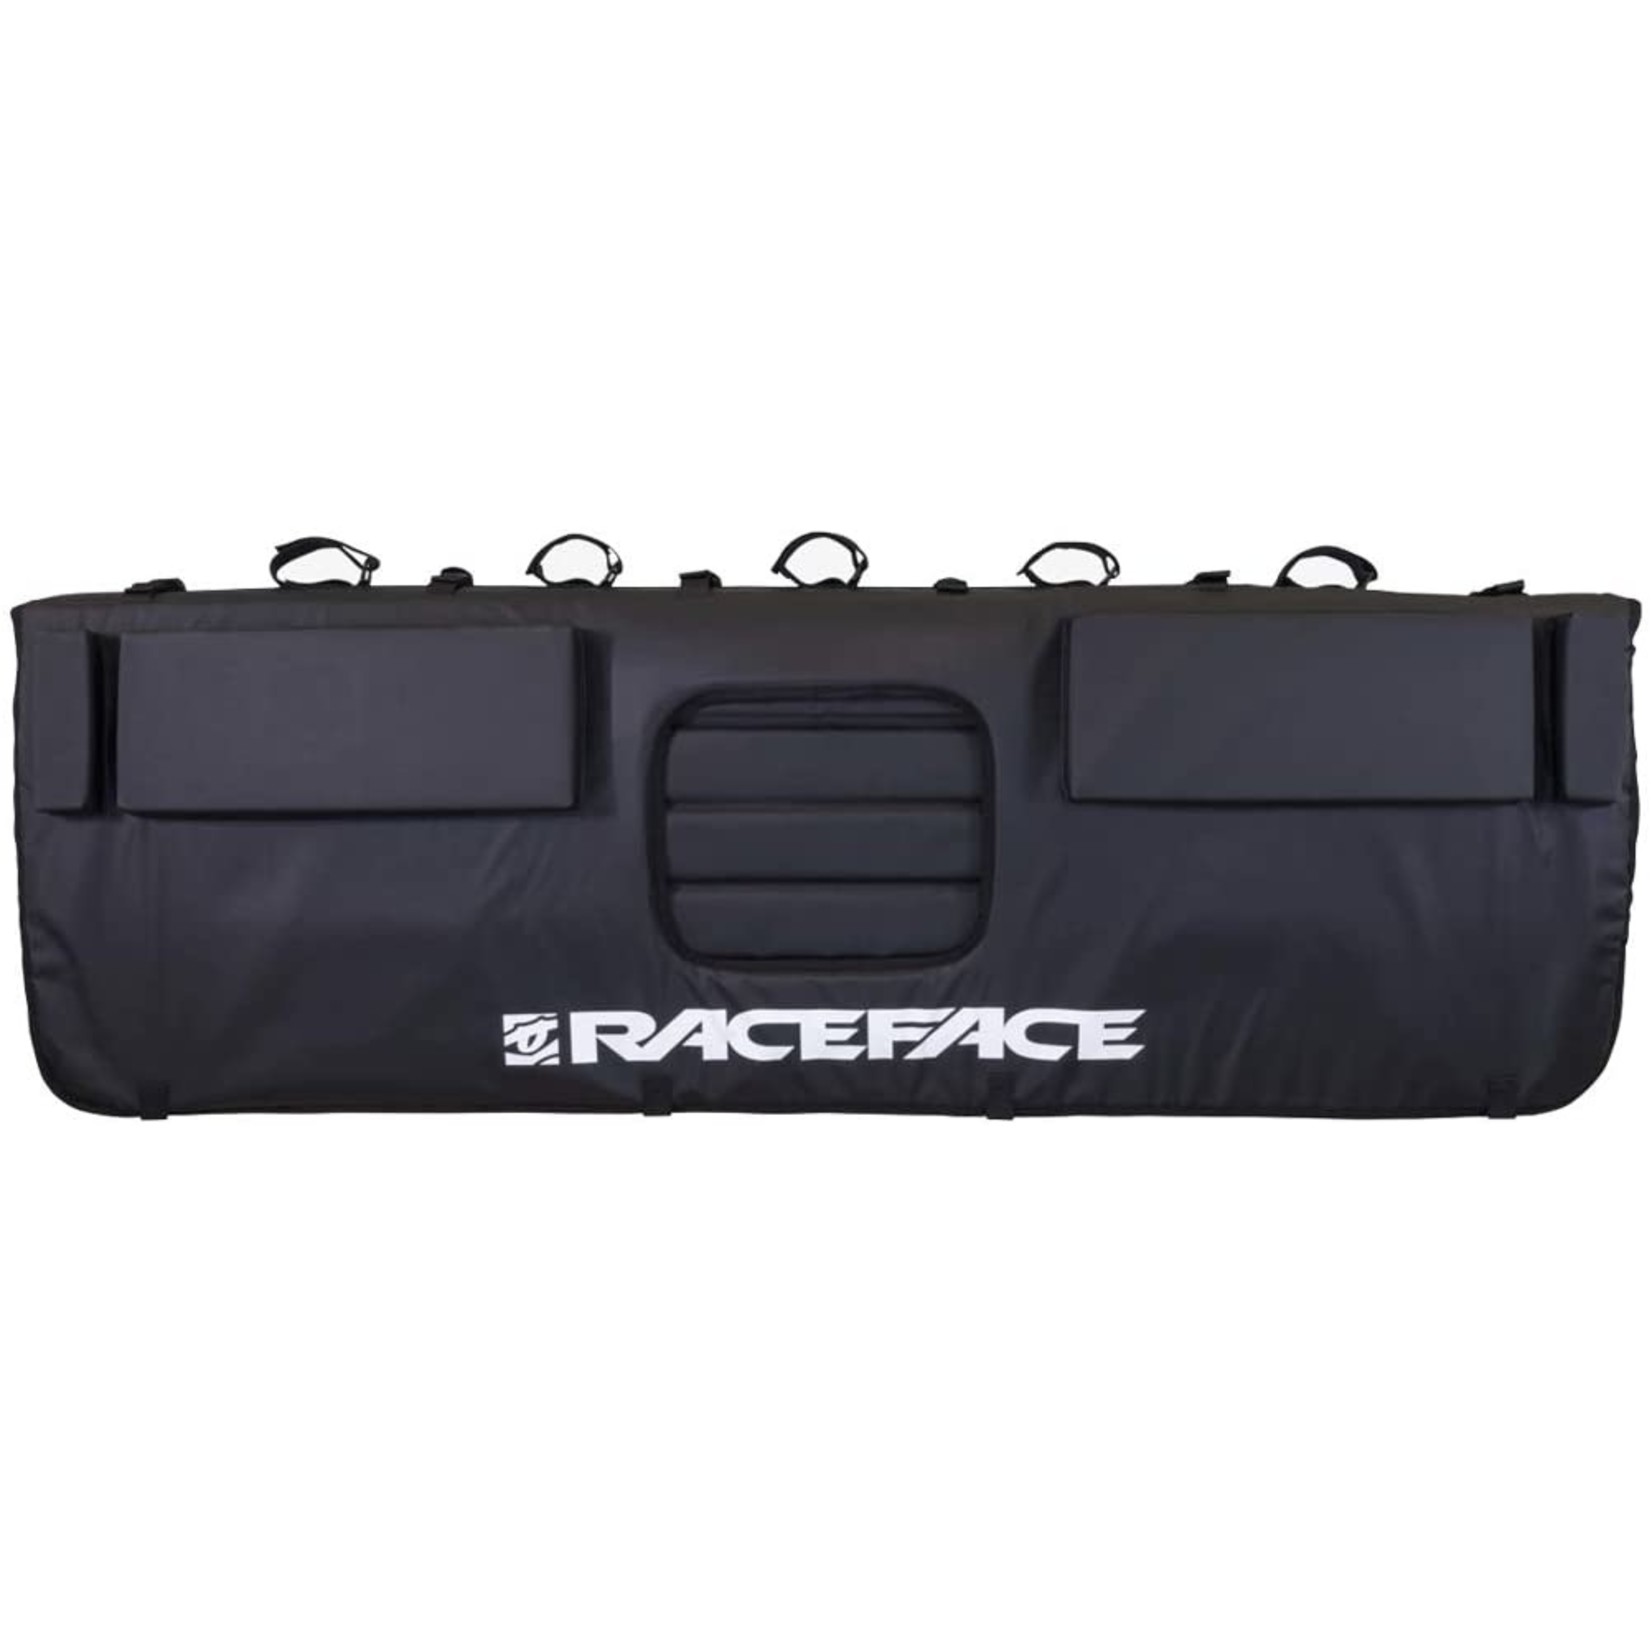 Raceface T2 Tailgate Pad